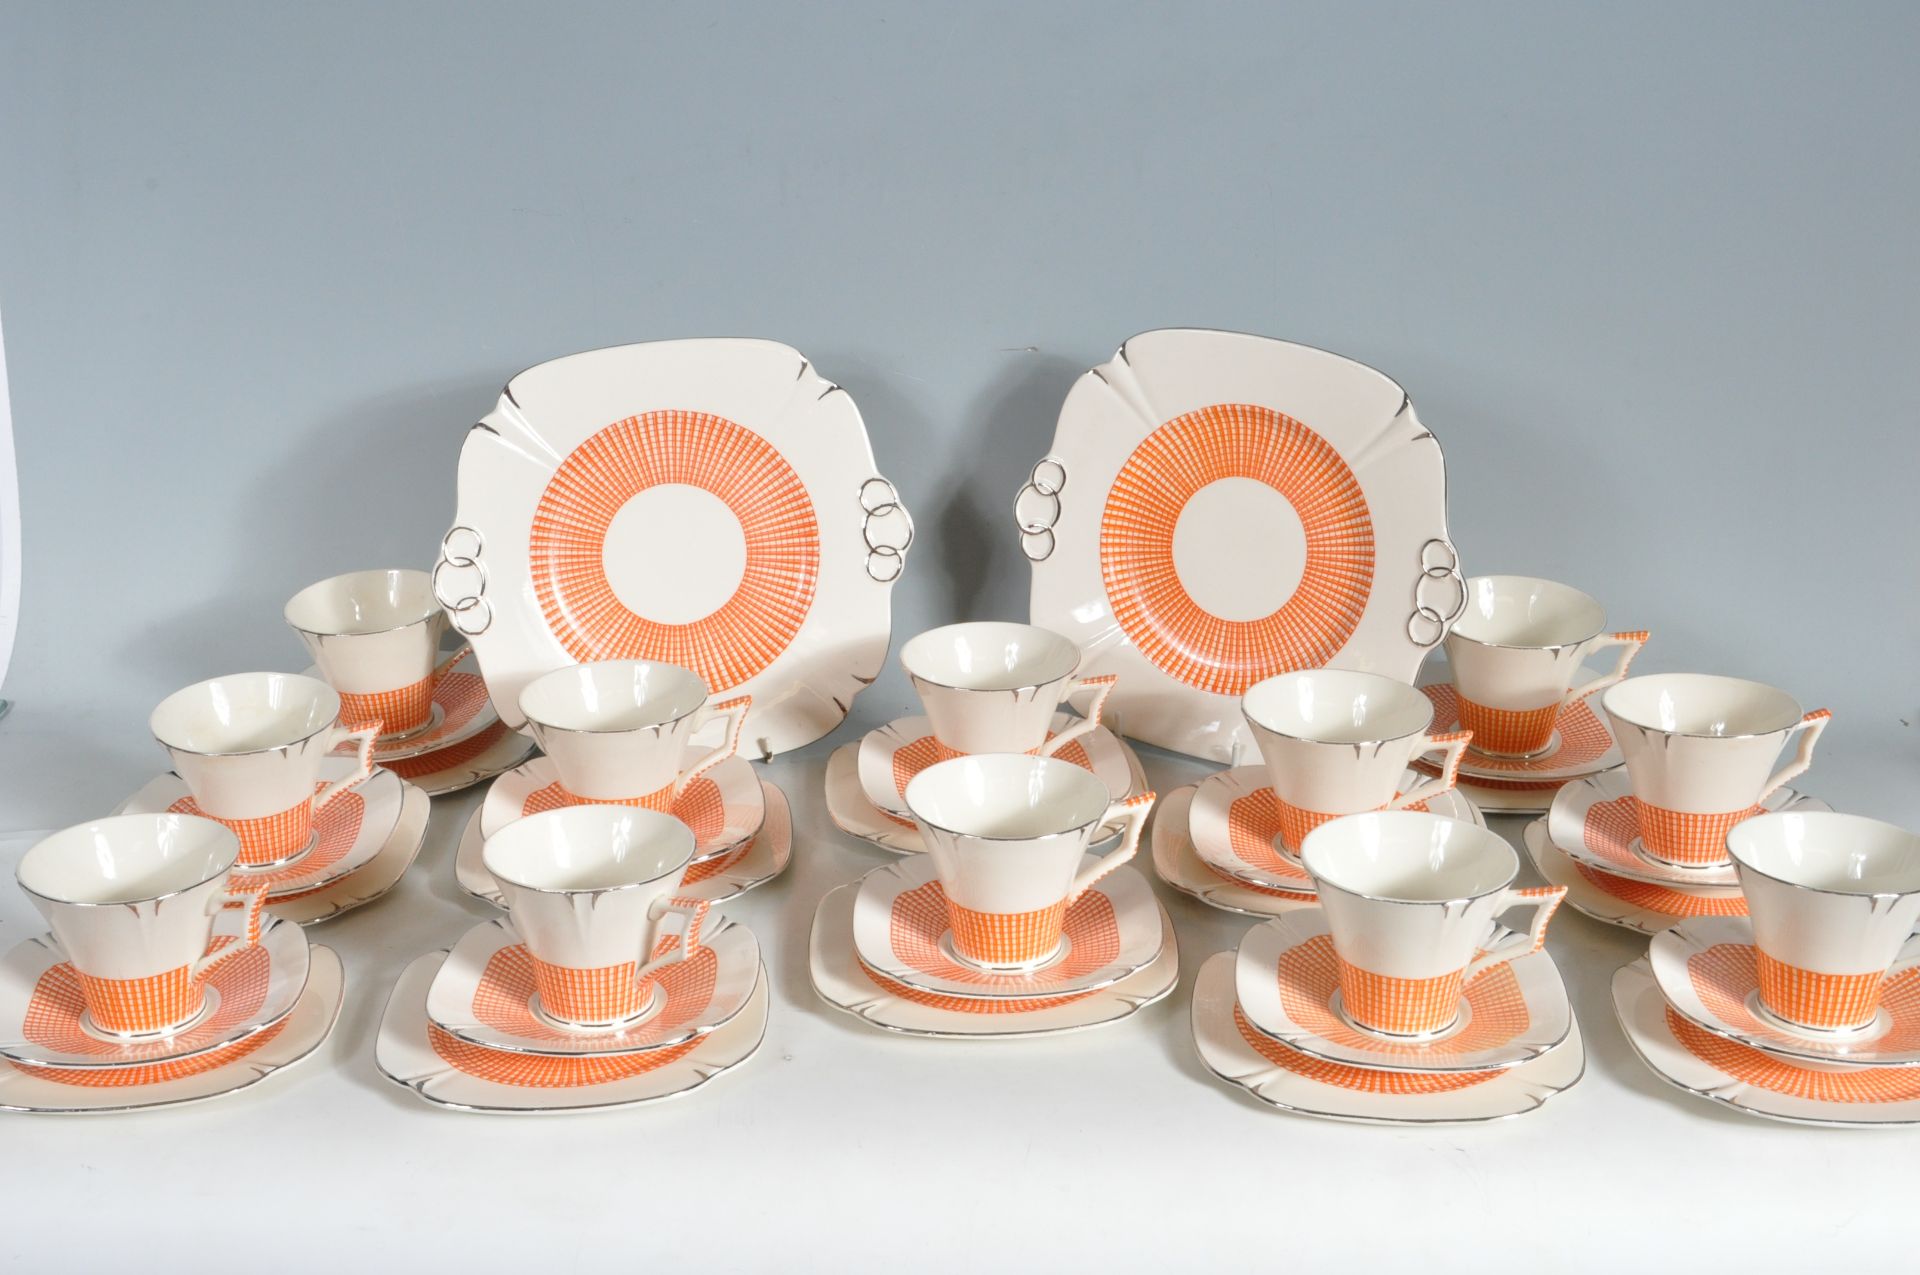 ART DECO STYLE 12 PERSONS TEA SET BY TAMS WARE “ GLENGARRY “